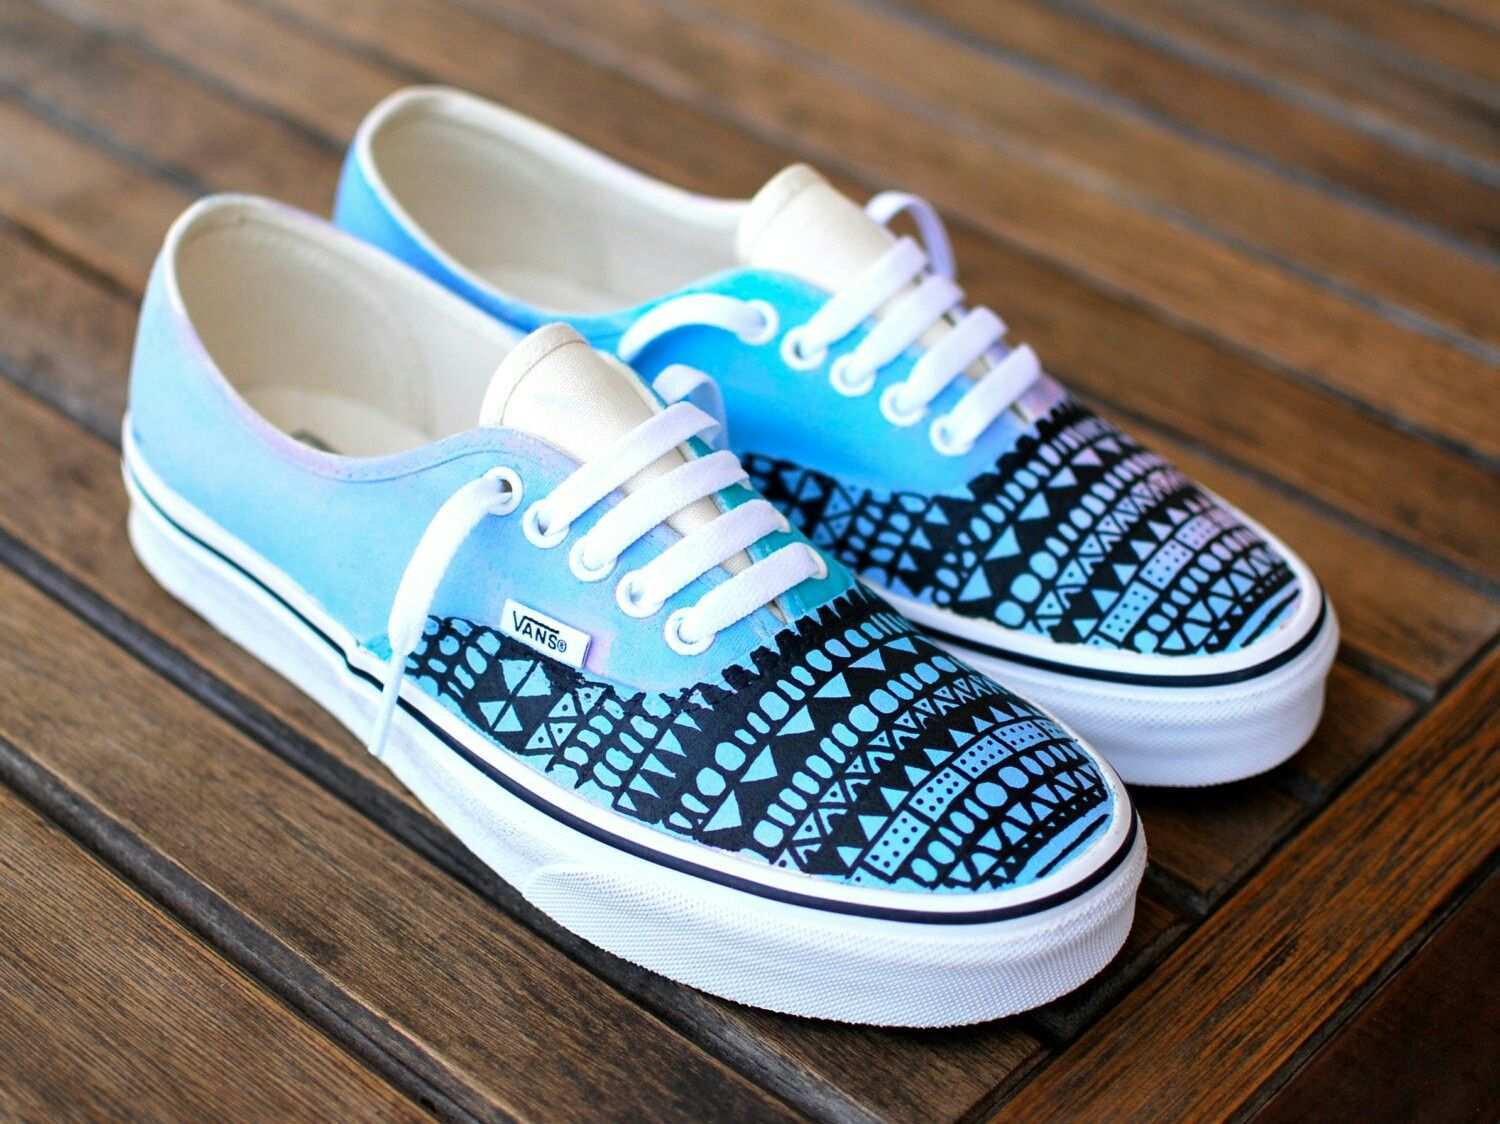 Pin By Tiktoktikkwatches On Best Watches On Pinterest Vans Authentic Shoes Patterned Vans Vans Authentic